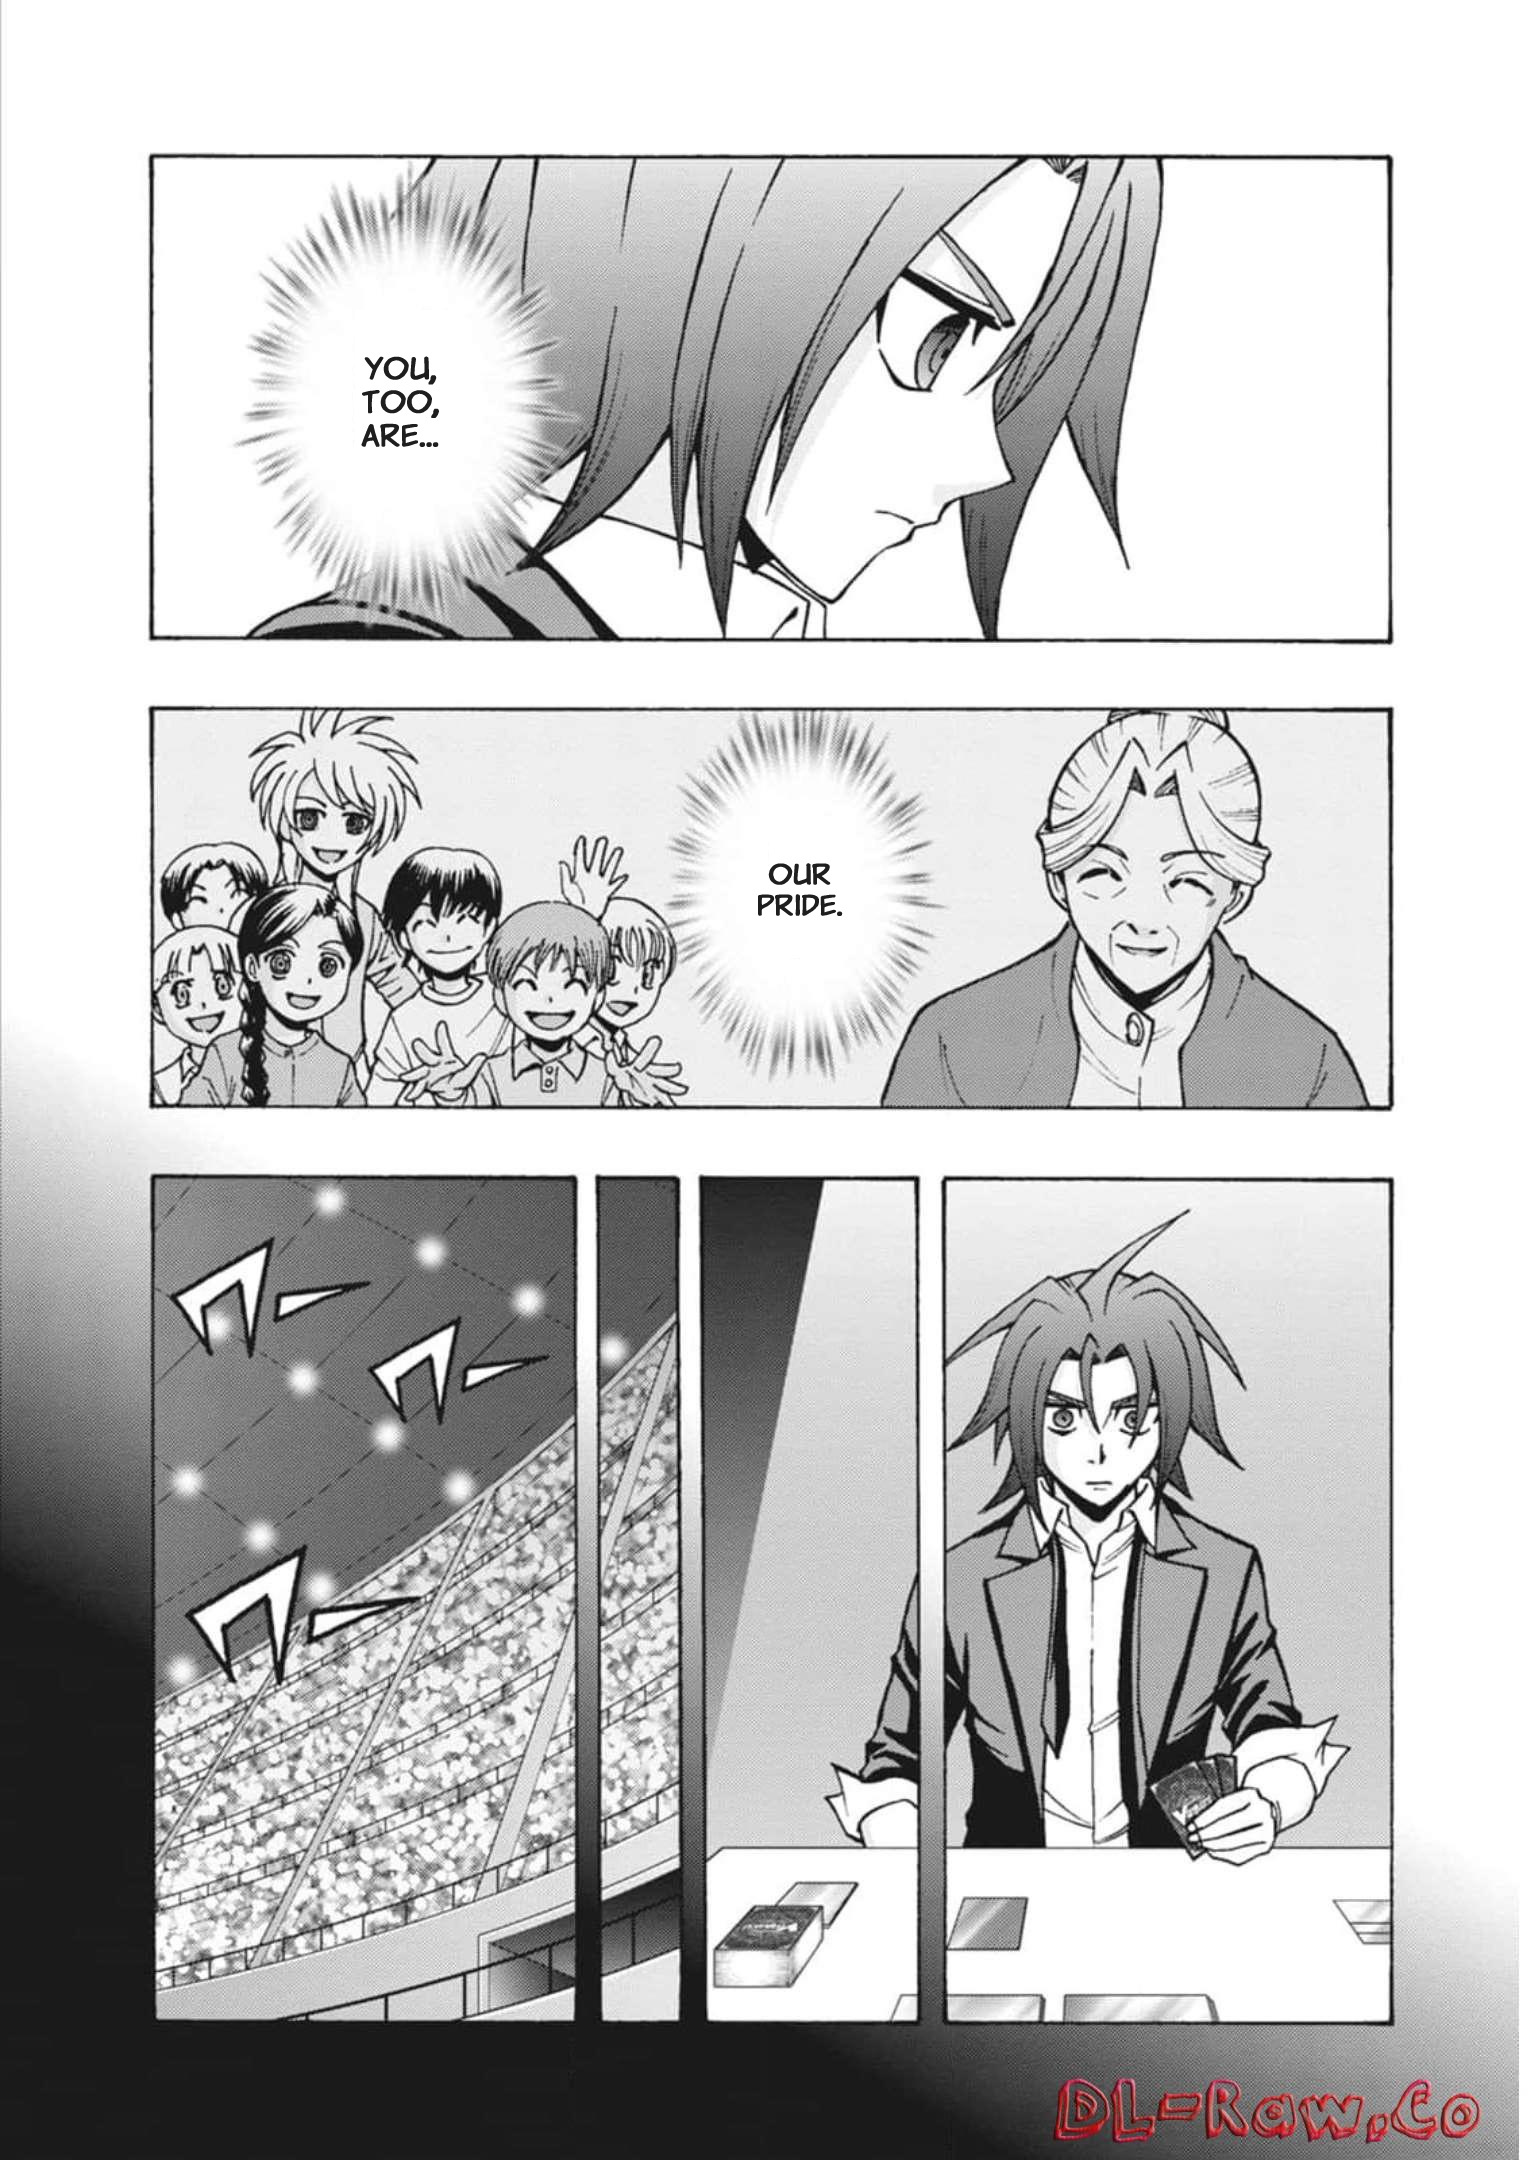 Cardfight!! Vanguard: Turnabout Vol.2 Chapter 10: Pride - Picture 2